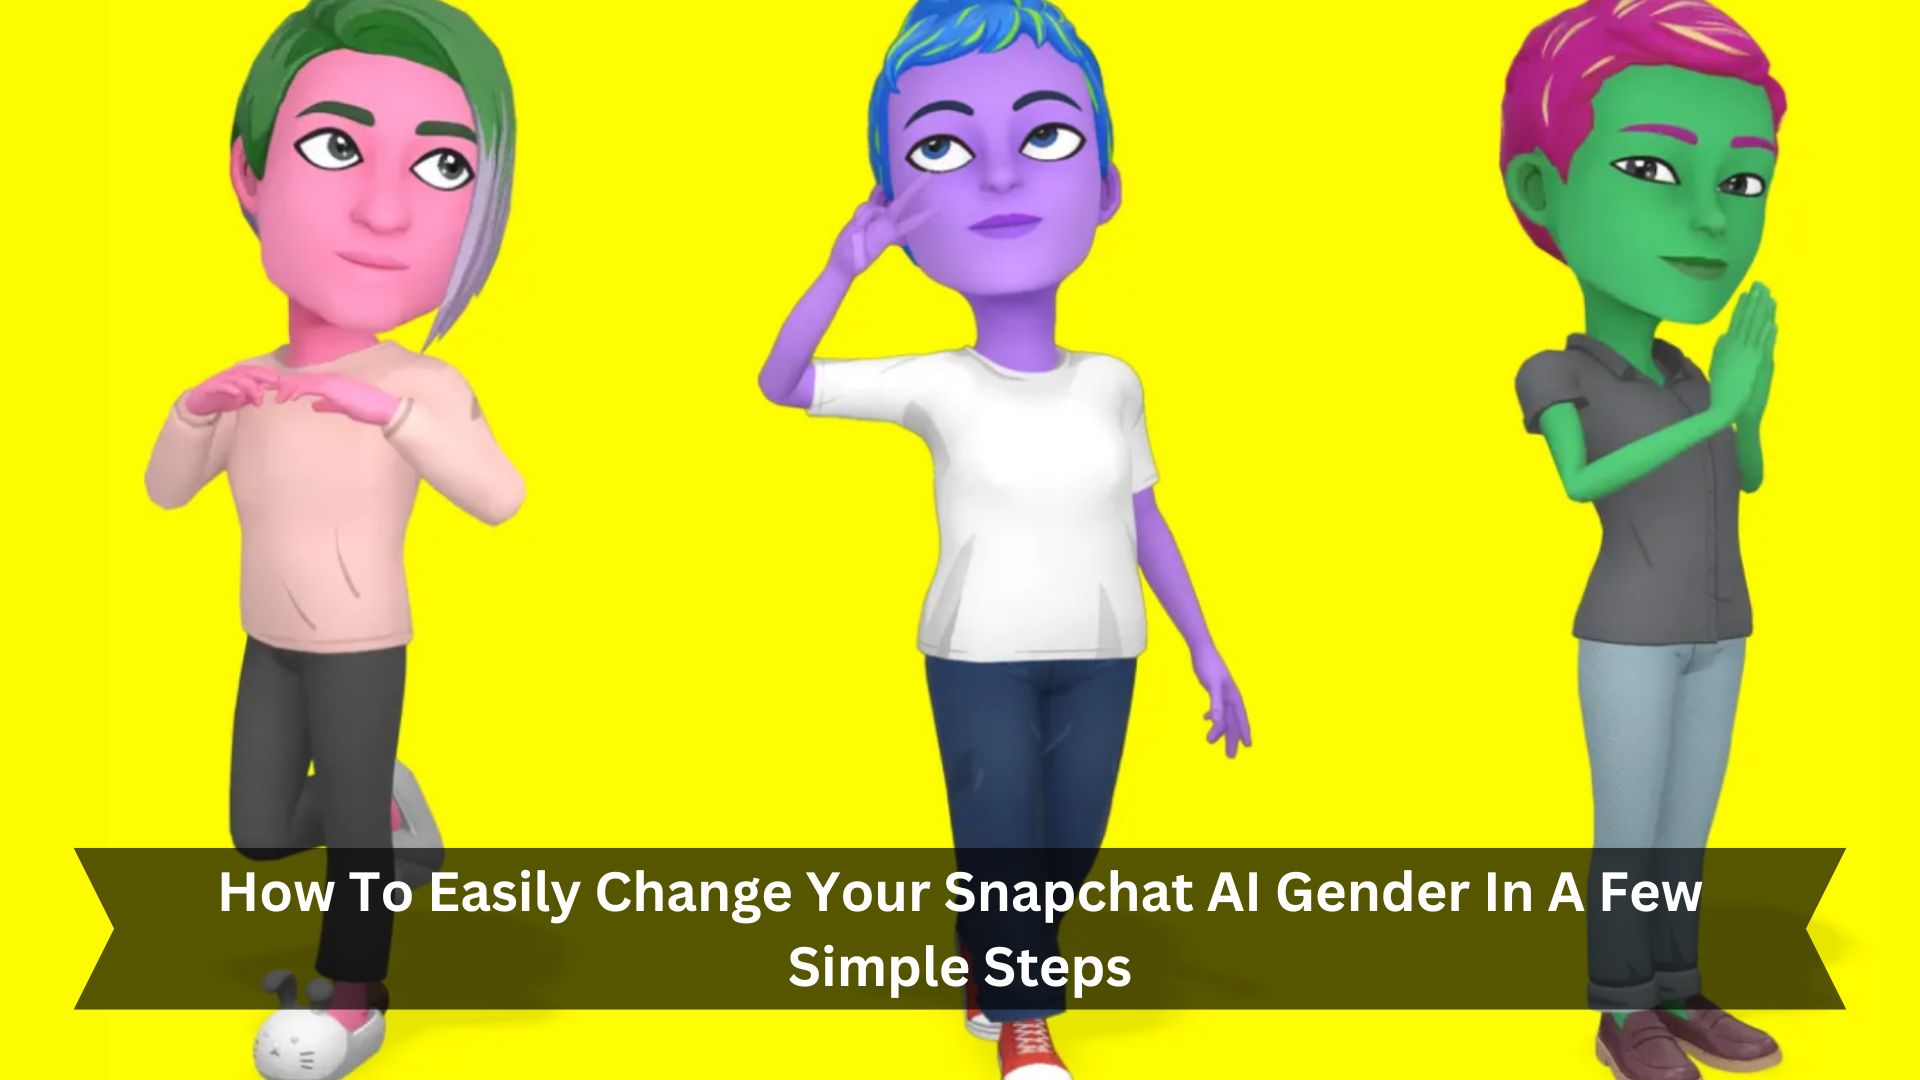 How To Easily Change Your Snapchat AI Gender In A Few Simple Steps